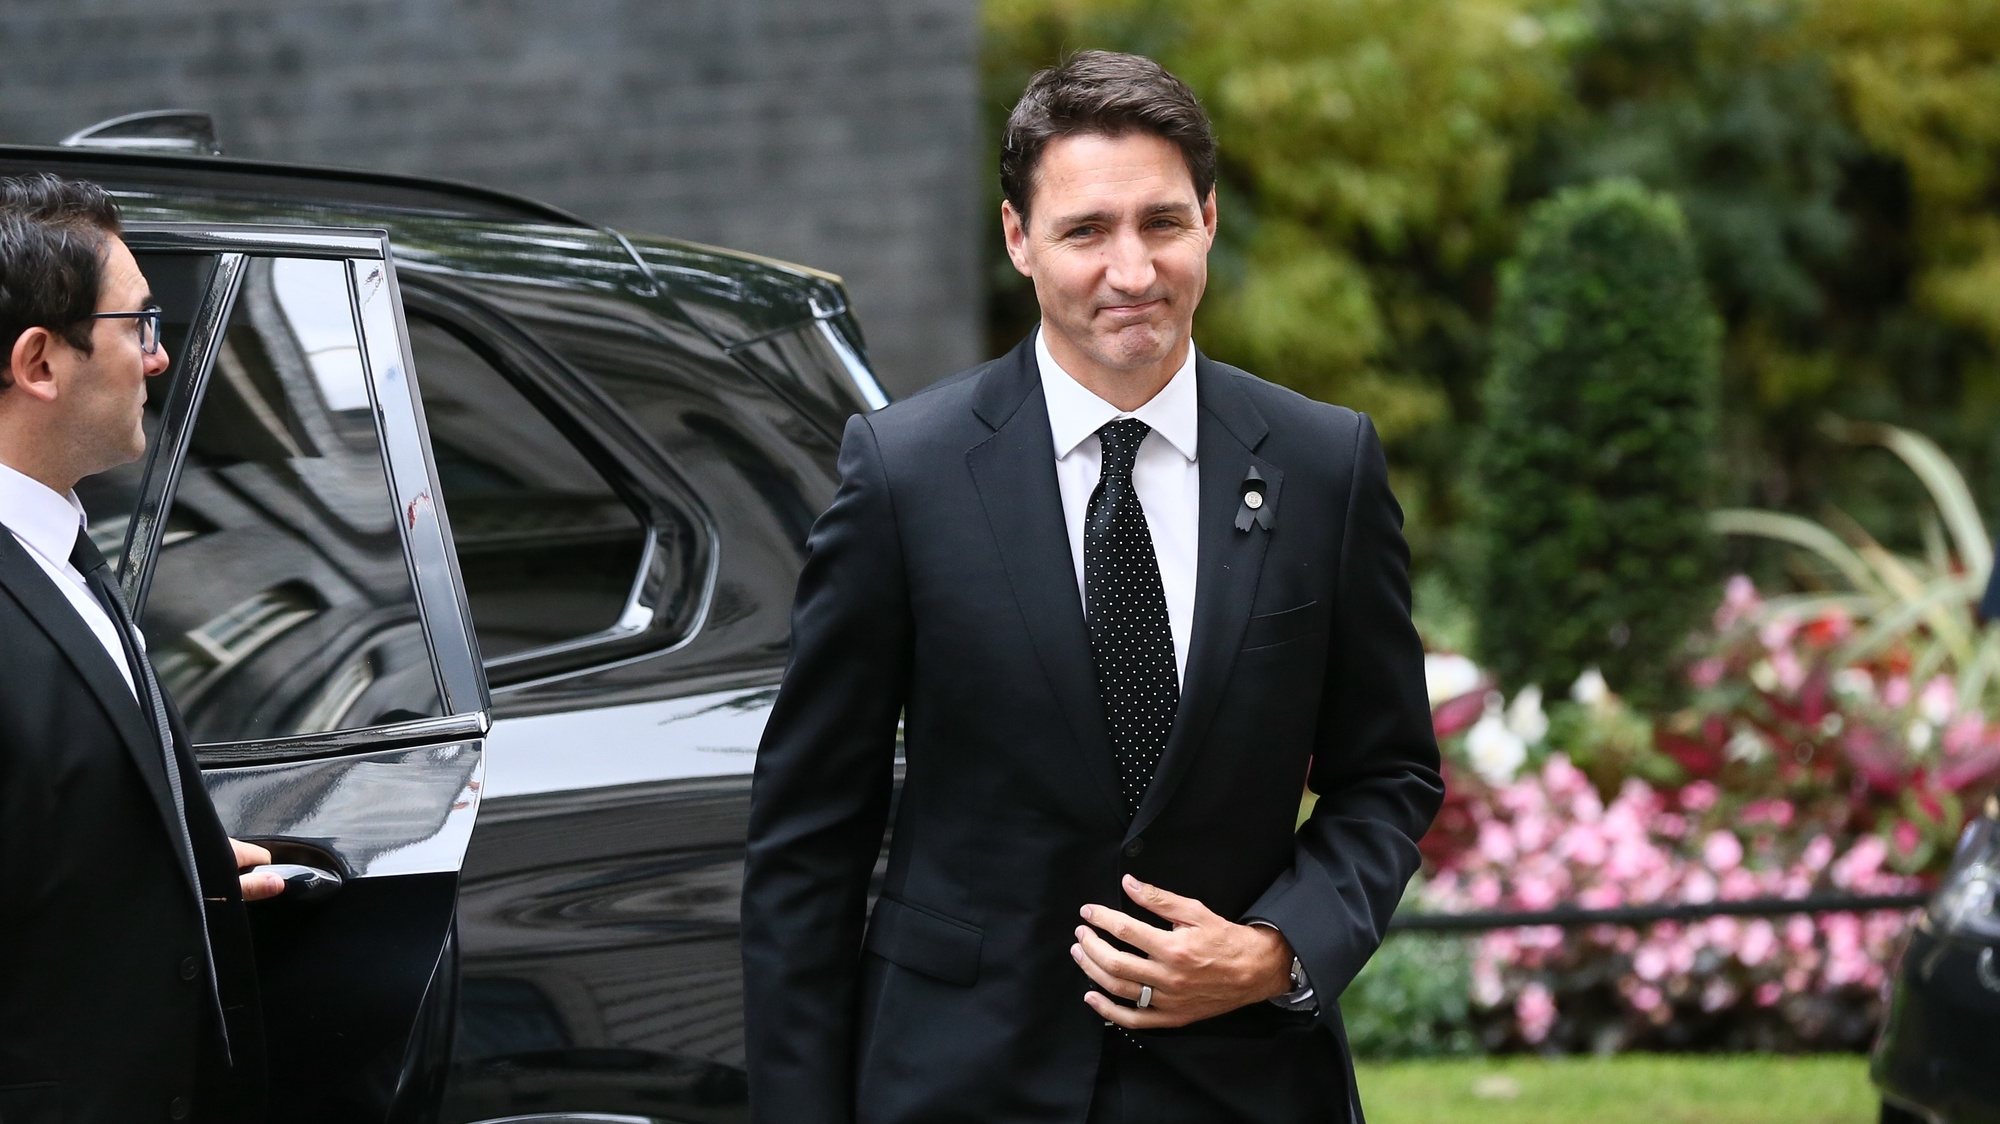 epa10191590 Canada&#039;s Prime Minister Justin Trudeau arrives in Downing Street for a meeting with the British Prime Minister Liz Truss in London, Britain, 18 September 2022. Trudeau is in London to attend the funeral of Queen Elizabeth II on 19 September.  EPA/Adam Vaughan